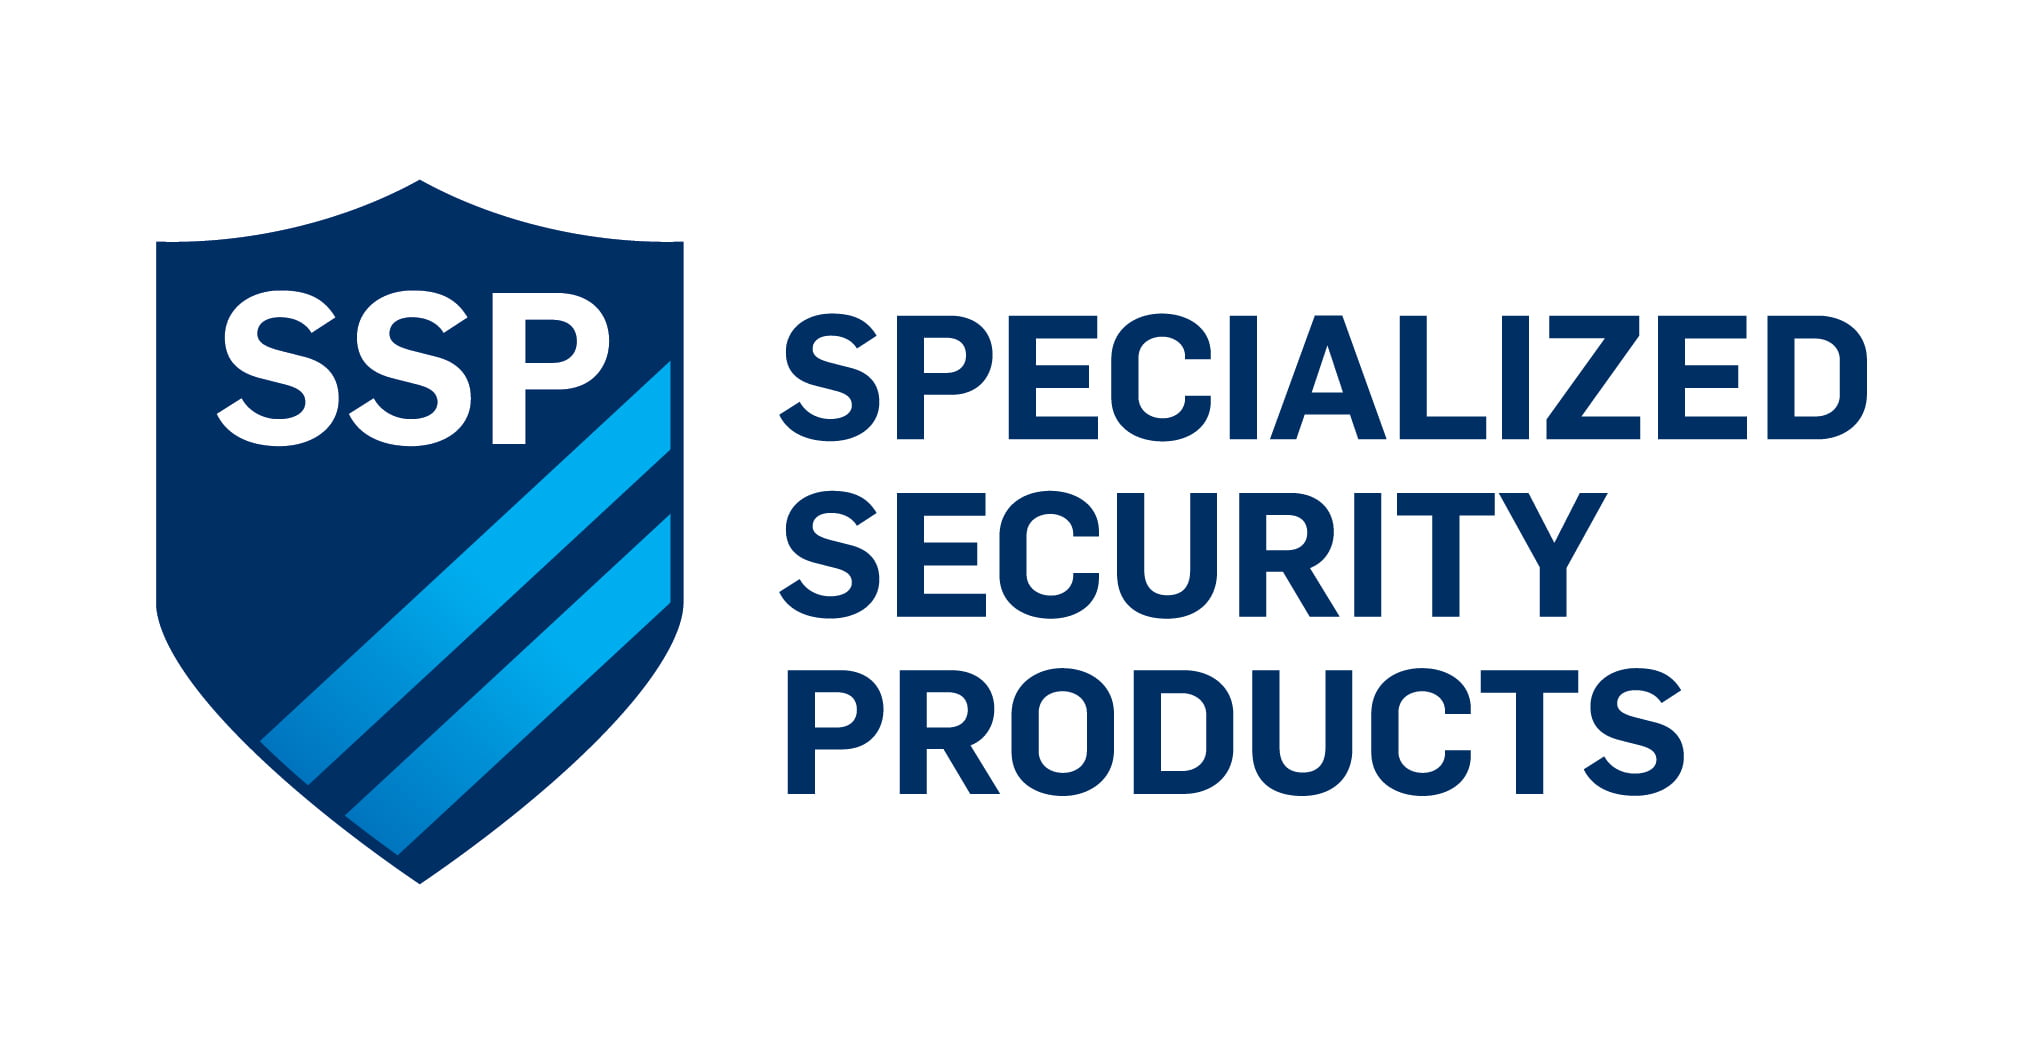 SSP - Specialized Security Products